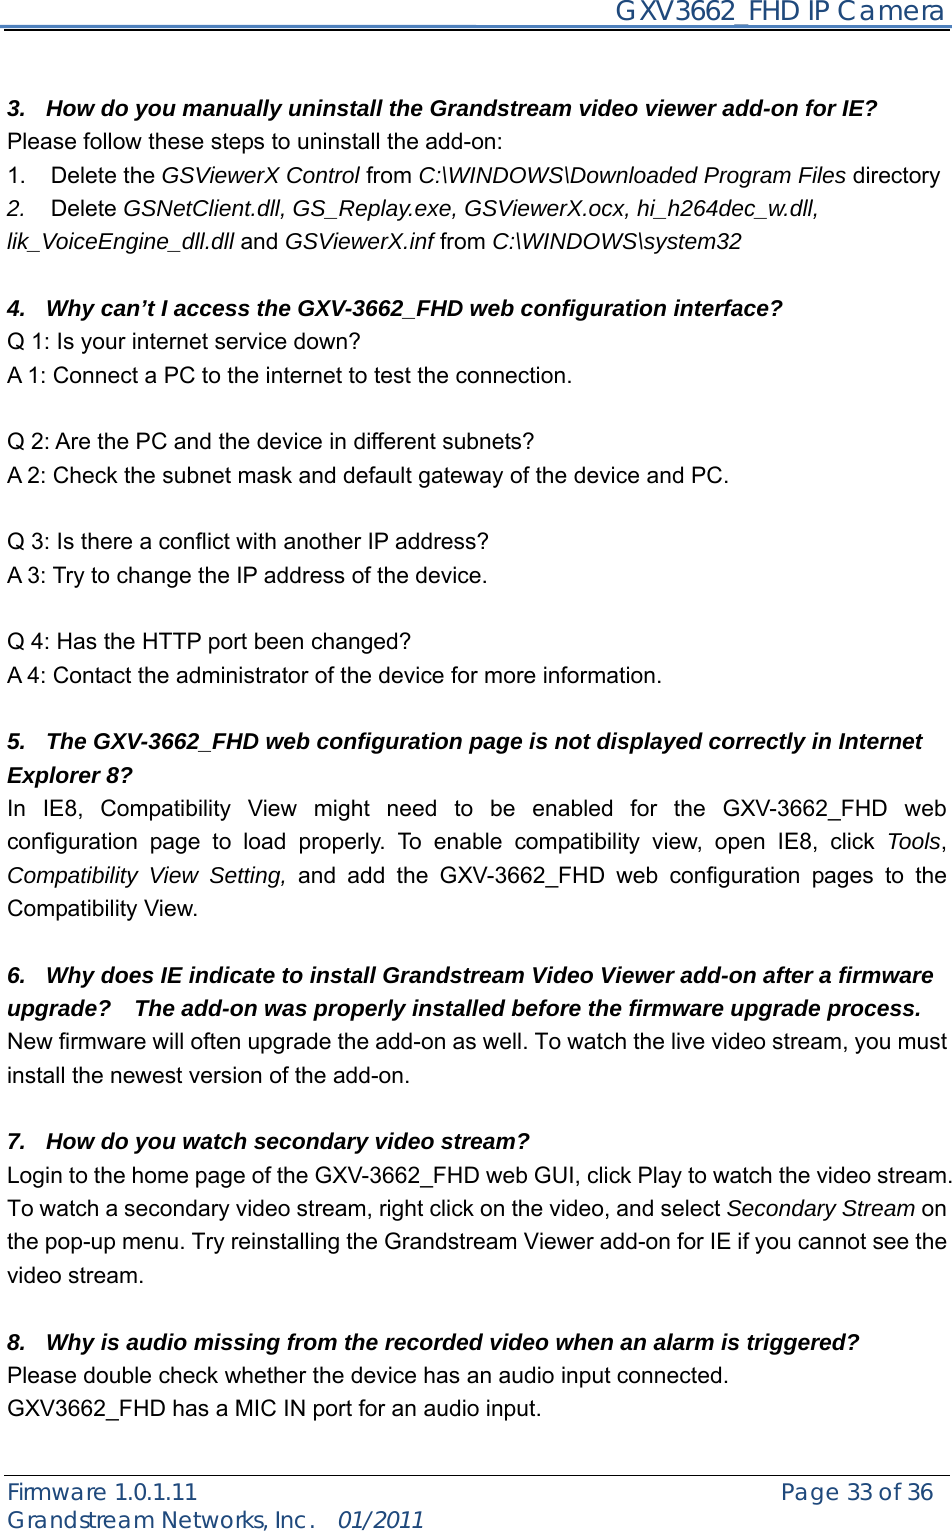     GXV3662_FHD IP Camera Firmware 1.0.1.11                                                   Page 33 of 36     Grandstream Networks, Inc.  01/2011   3.  How do you manually uninstall the Grandstream video viewer add-on for IE?   Please follow these steps to uninstall the add-on:   1. Delete the GSViewerX Control from C:\WINDOWS\Downloaded Program Files directory   2.  Delete GSNetClient.dll, GS_Replay.exe, GSViewerX.ocx, hi_h264dec_w.dll, lik_VoiceEngine_dll.dll and GSViewerX.inf from C:\WINDOWS\system32  4.  Why can’t I access the GXV-3662_FHD web configuration interface?   Q 1: Is your internet service down?   A 1: Connect a PC to the internet to test the connection.  Q 2: Are the PC and the device in different subnets?   A 2: Check the subnet mask and default gateway of the device and PC.  Q 3: Is there a conflict with another IP address?   A 3: Try to change the IP address of the device.    Q 4: Has the HTTP port been changed?   A 4: Contact the administrator of the device for more information.  5.  The GXV-3662_FHD web configuration page is not displayed correctly in Internet Explorer 8? In IE8, Compatibility View might need to be enabled for the GXV-3662_FHD web configuration page to load properly. To enable compatibility view, open IE8, click Tools, Compatibility View Setting, and add the GXV-3662_FHD web configuration pages to the Compatibility View.    6.  Why does IE indicate to install Grandstream Video Viewer add-on after a firmware upgrade?    The add-on was properly installed before the firmware upgrade process. New firmware will often upgrade the add-on as well. To watch the live video stream, you must install the newest version of the add-on.    7.  How do you watch secondary video stream?   Login to the home page of the GXV-3662_FHD web GUI, click Play to watch the video stream. To watch a secondary video stream, right click on the video, and select Secondary Stream on the pop-up menu. Try reinstalling the Grandstream Viewer add-on for IE if you cannot see the video stream.  8.  Why is audio missing from the recorded video when an alarm is triggered? Please double check whether the device has an audio input connected.   GXV3662_FHD has a MIC IN port for an audio input.    